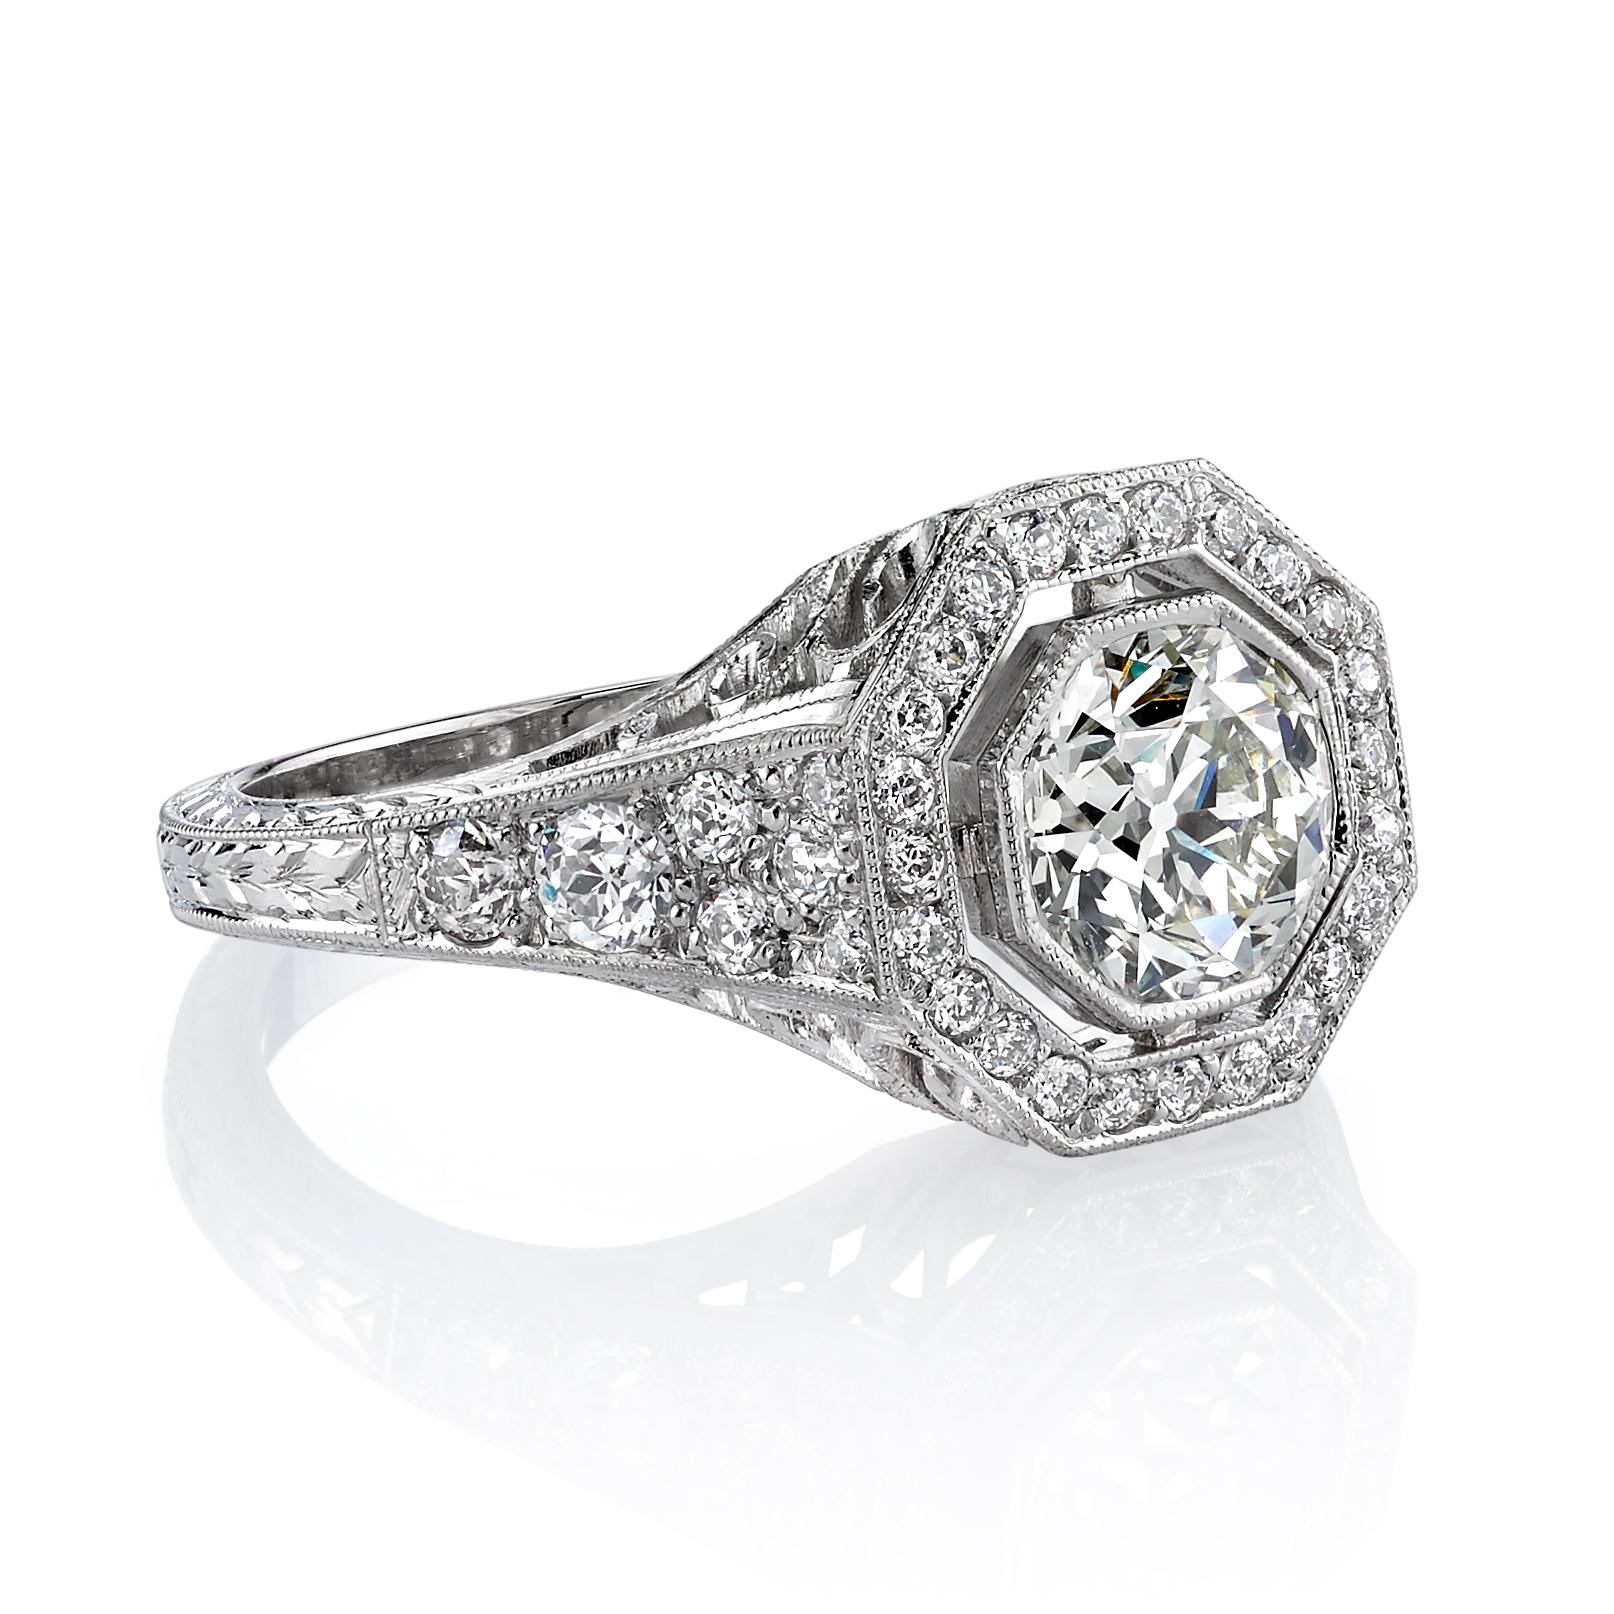 1.04ct H/S1 EGL certified old European cut diamond with 0.46ctw diamond accents set in a handcrafted platinum mounting. Ring is currently a size 6 and can be sized to fit.